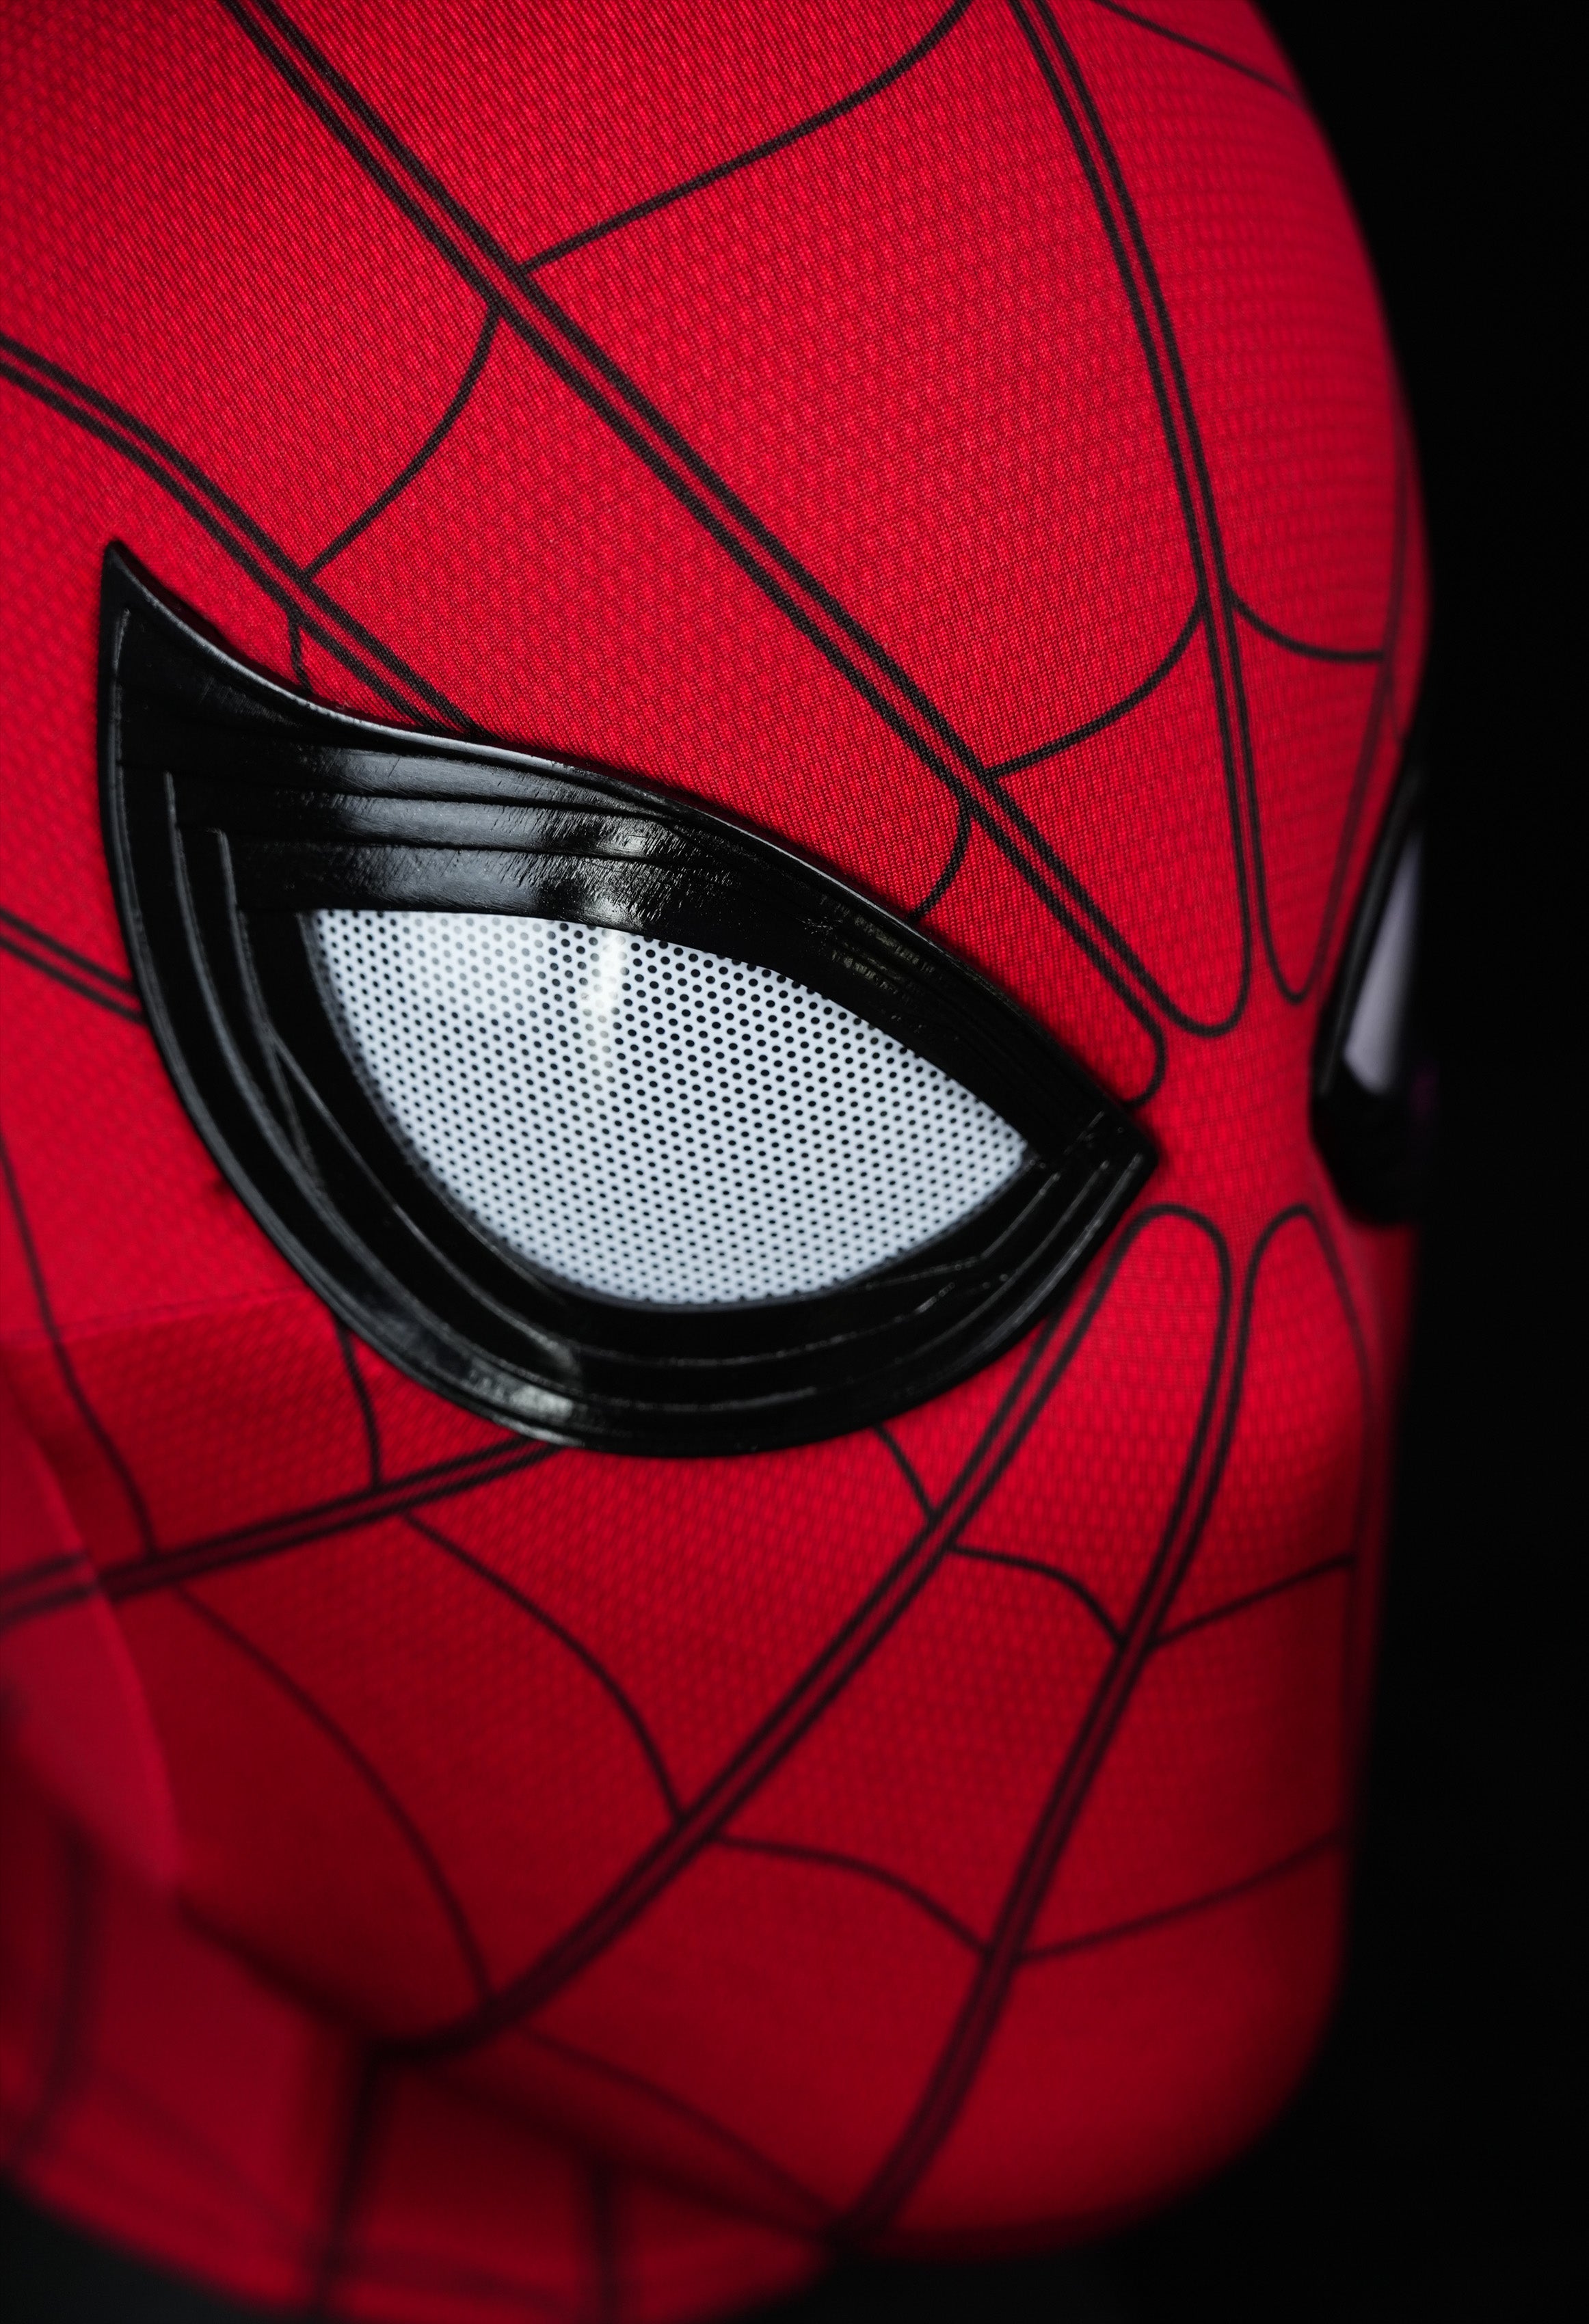 Homecoming Spidey Mask  (Tom Holland version)